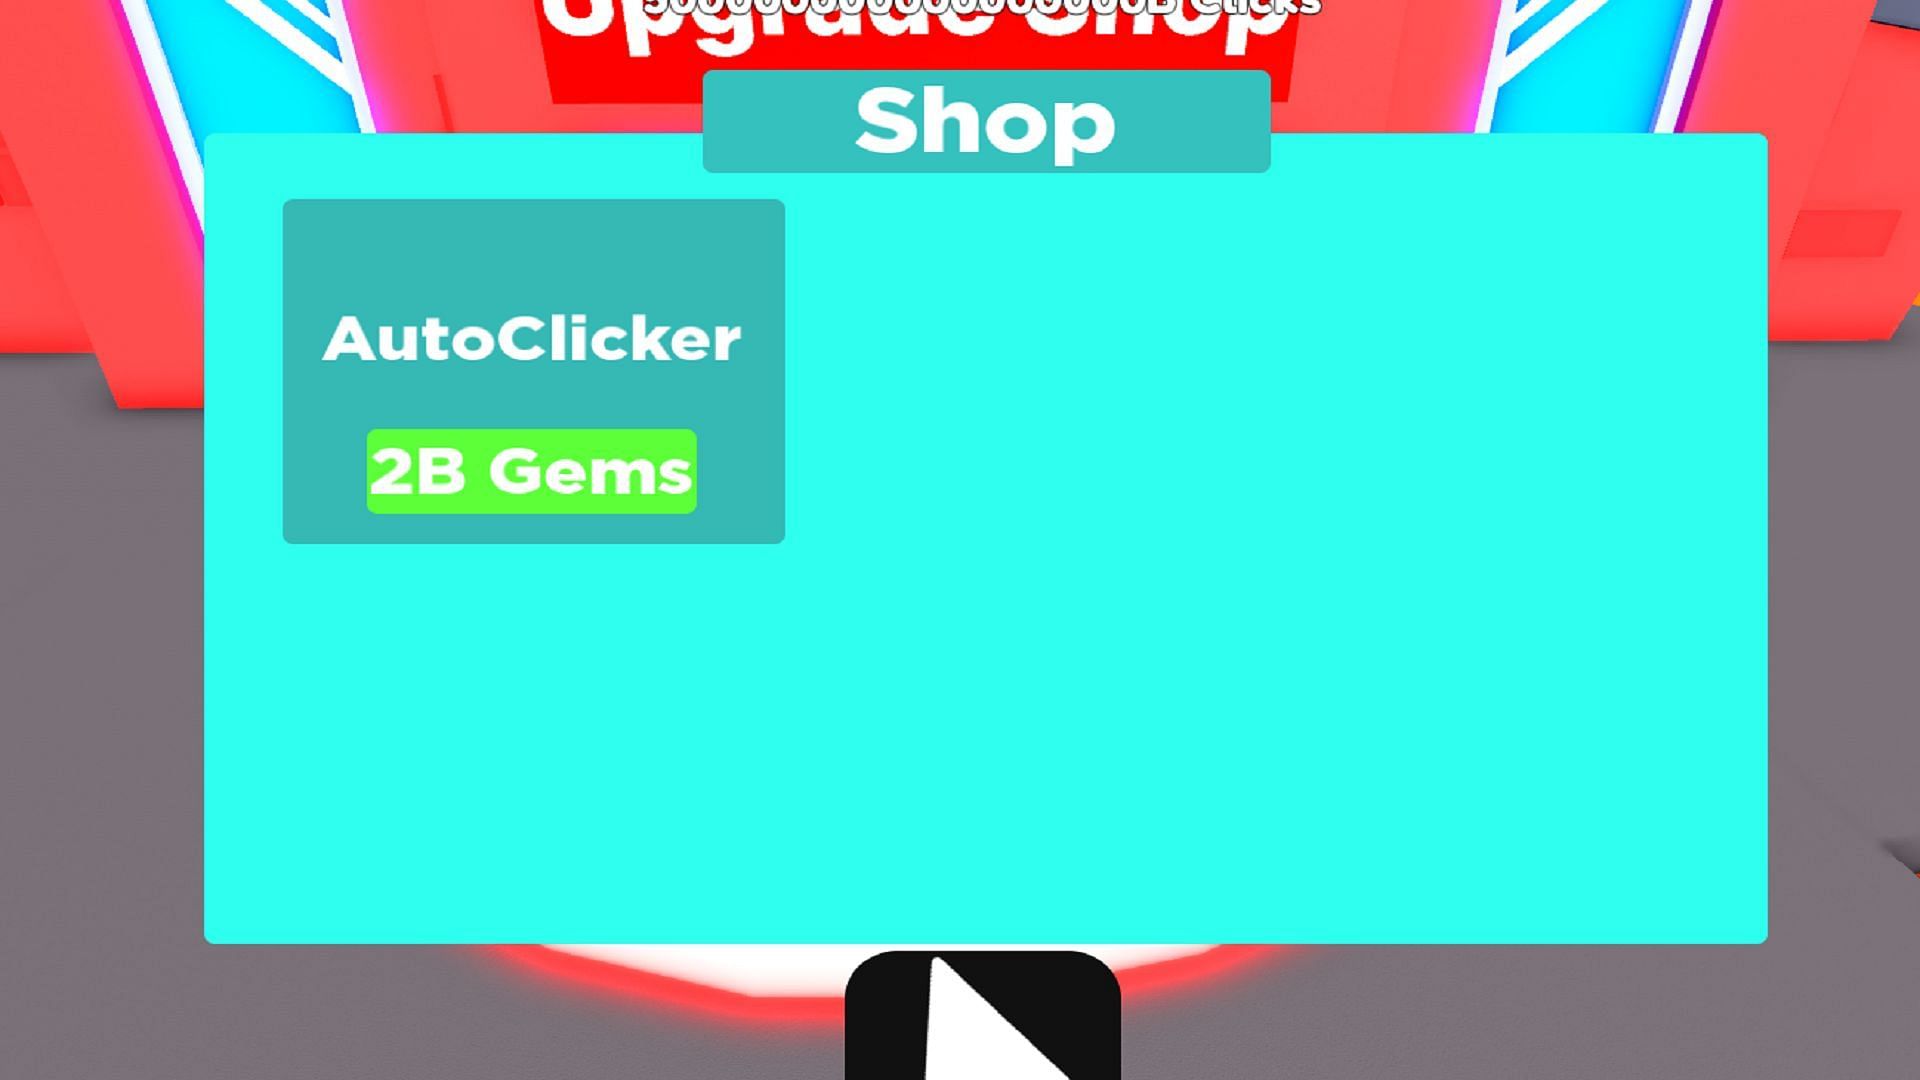 What can be purchased with Gems and Clicks? (Image via Roblox)